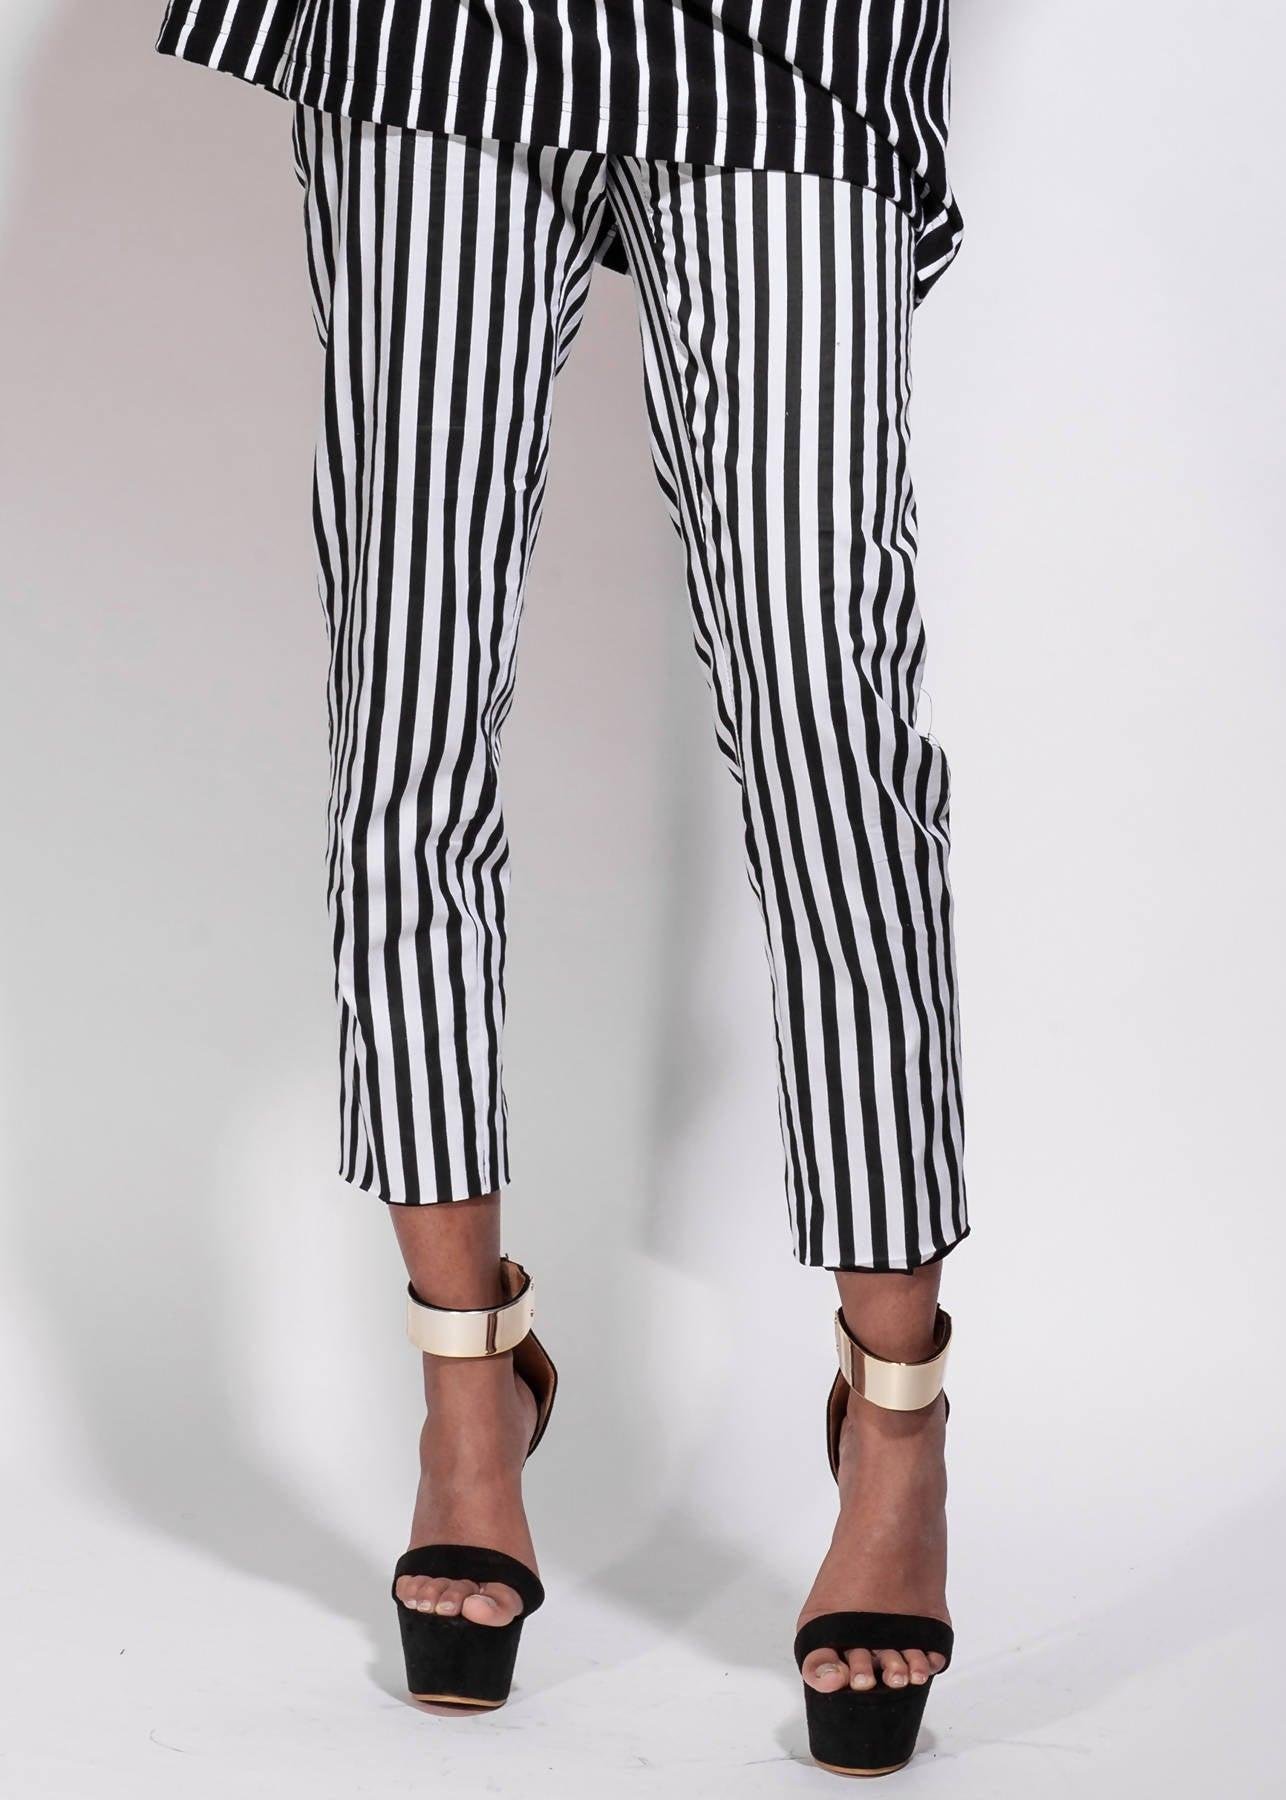 Black/White Striped Pants Anklelength with a Straight Fit by STEVEN VANDERYT